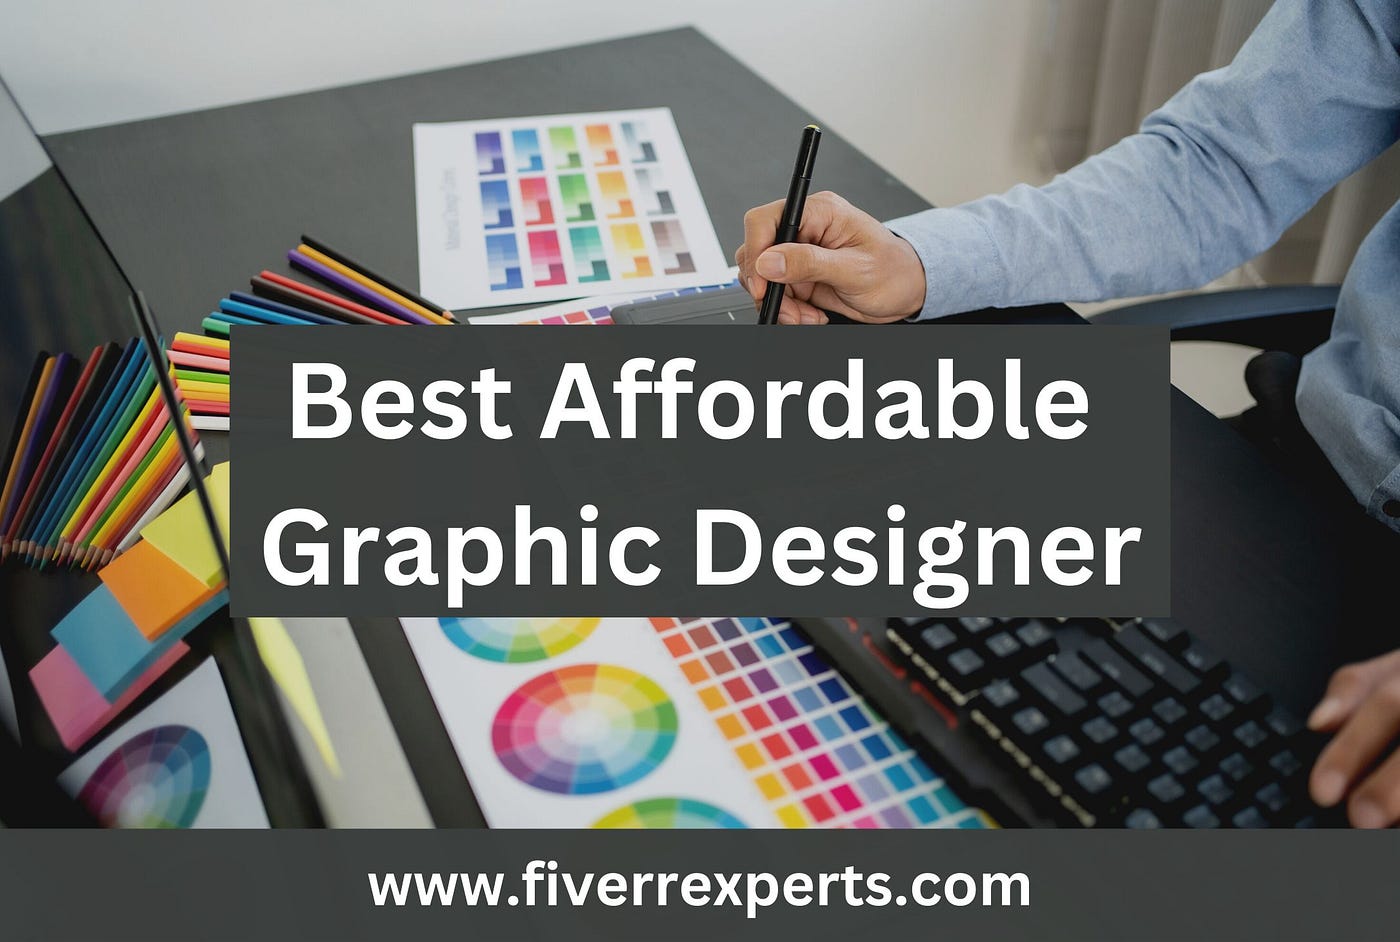 Cheap Graphic Designers For Hire